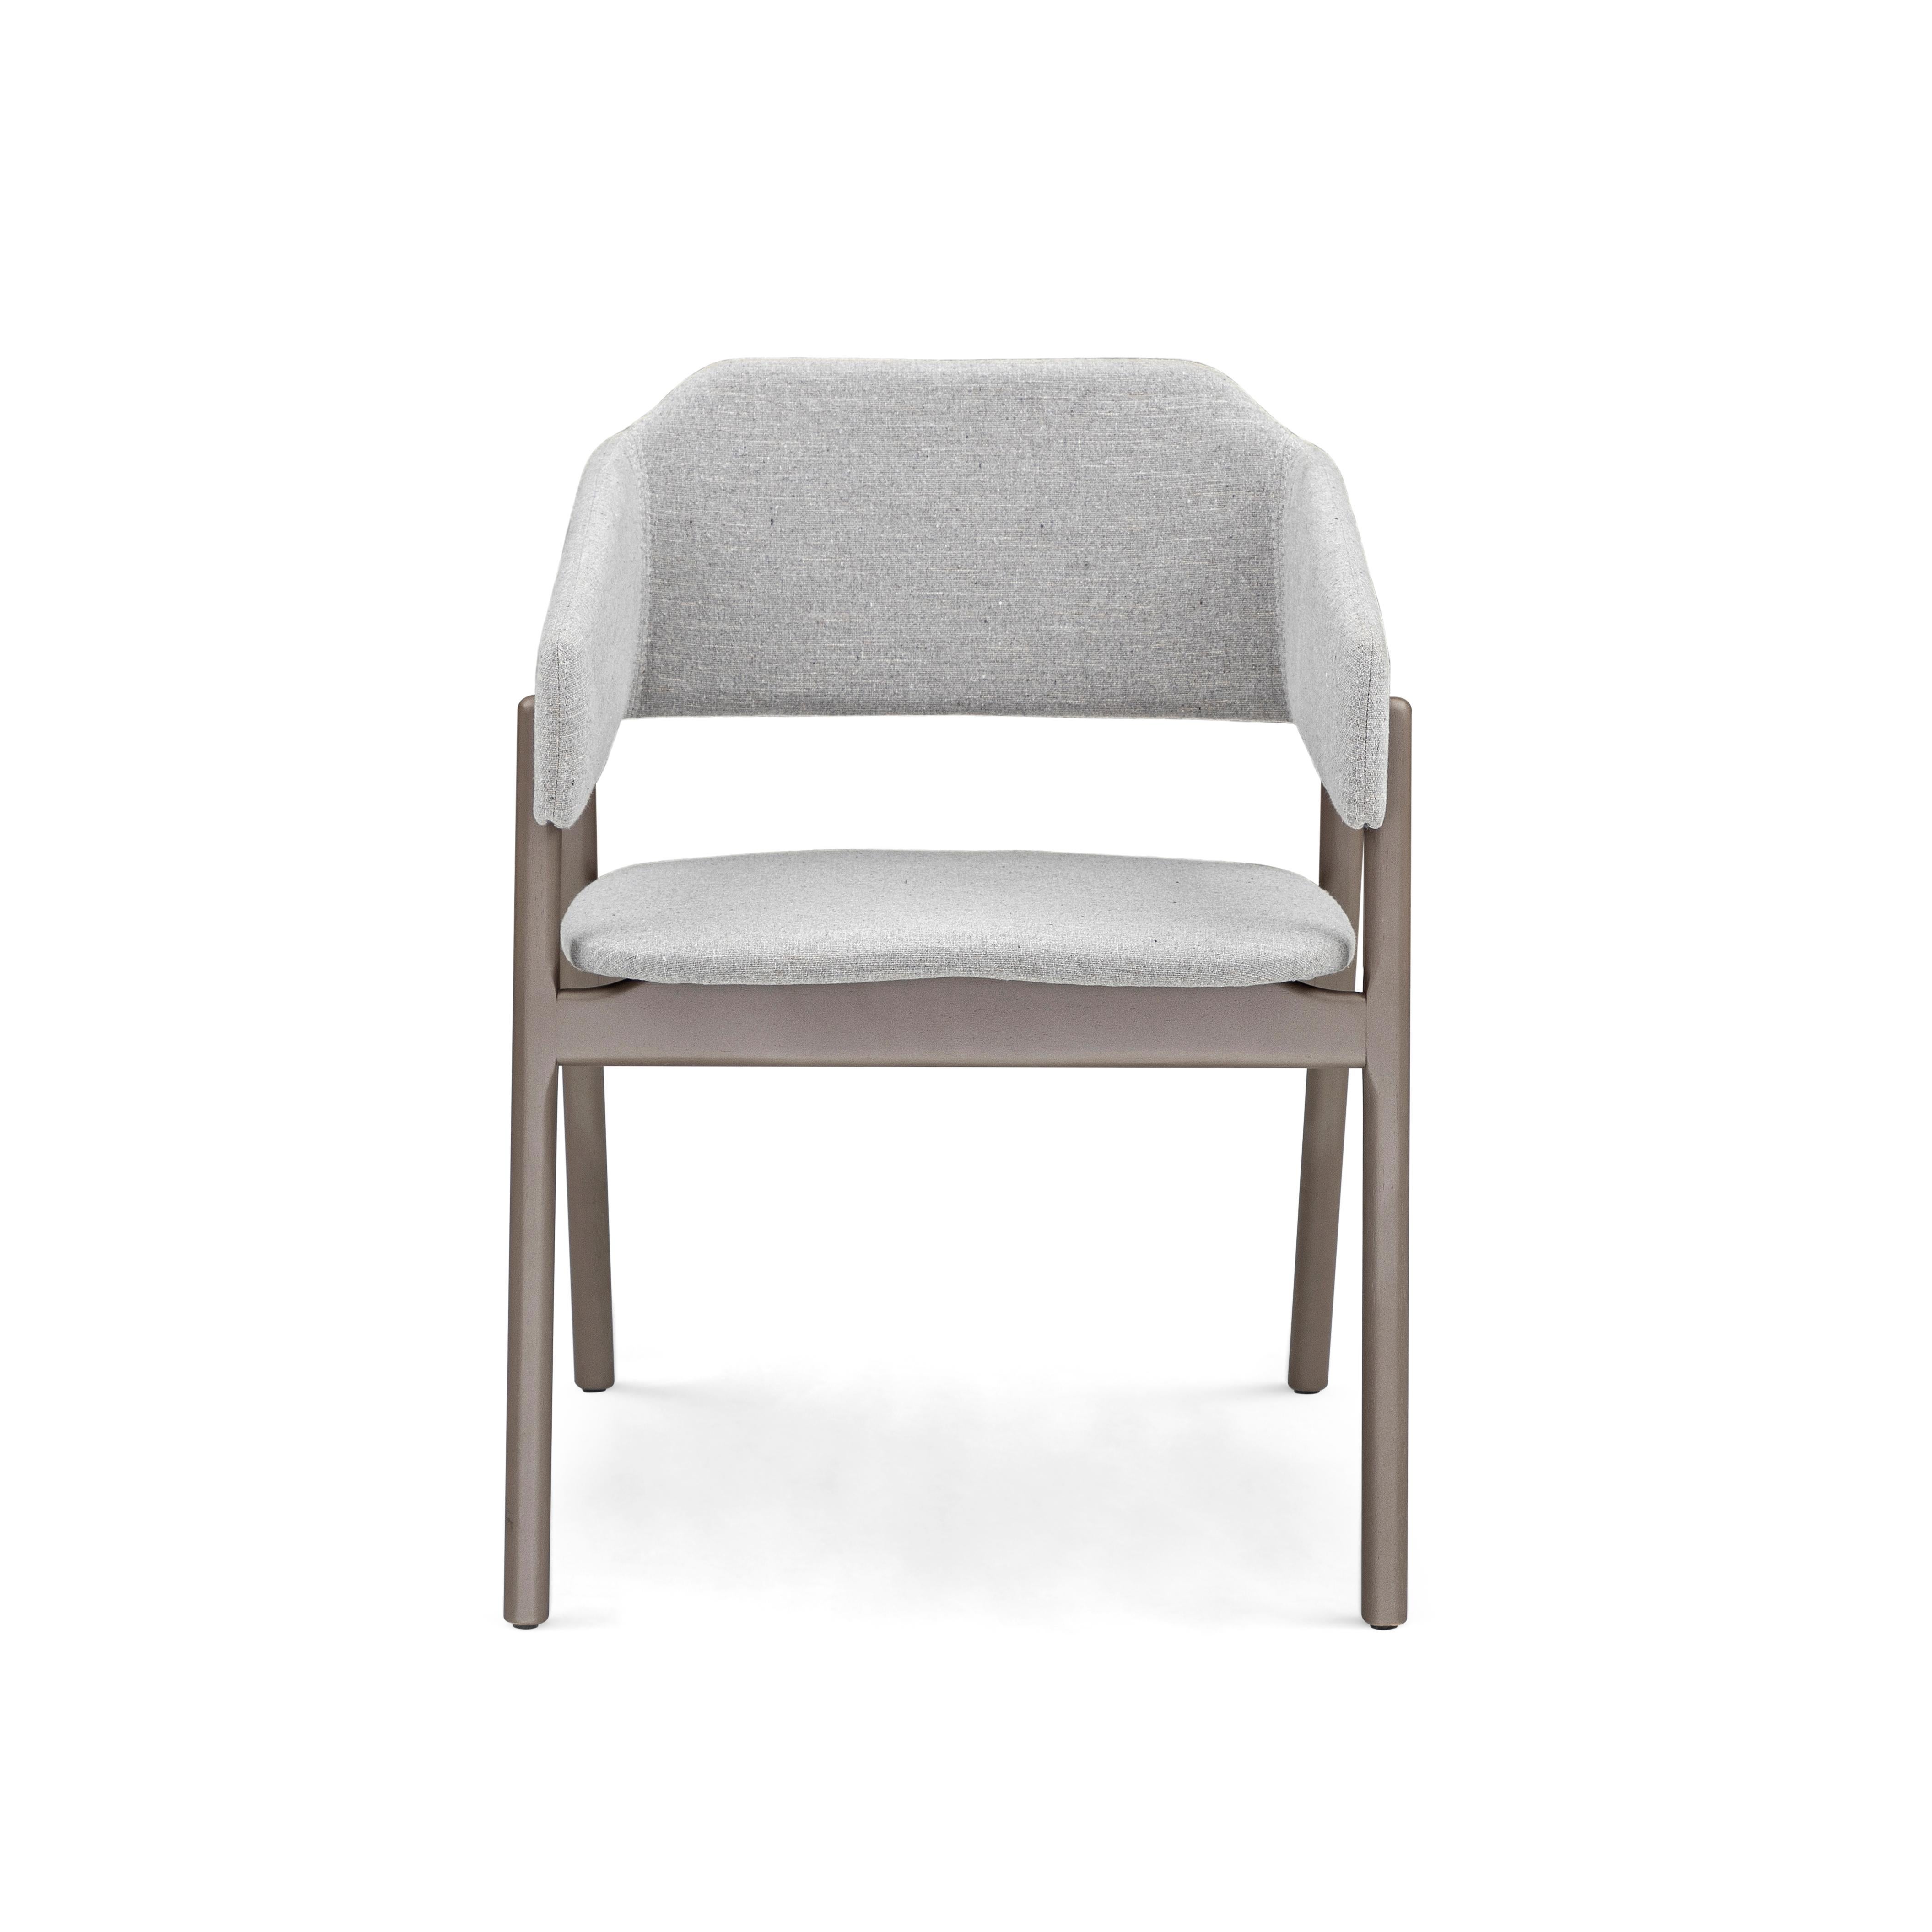 Stuzi Chair in Gray Fabric and Chocolate Wood In New Condition For Sale In Miami, FL